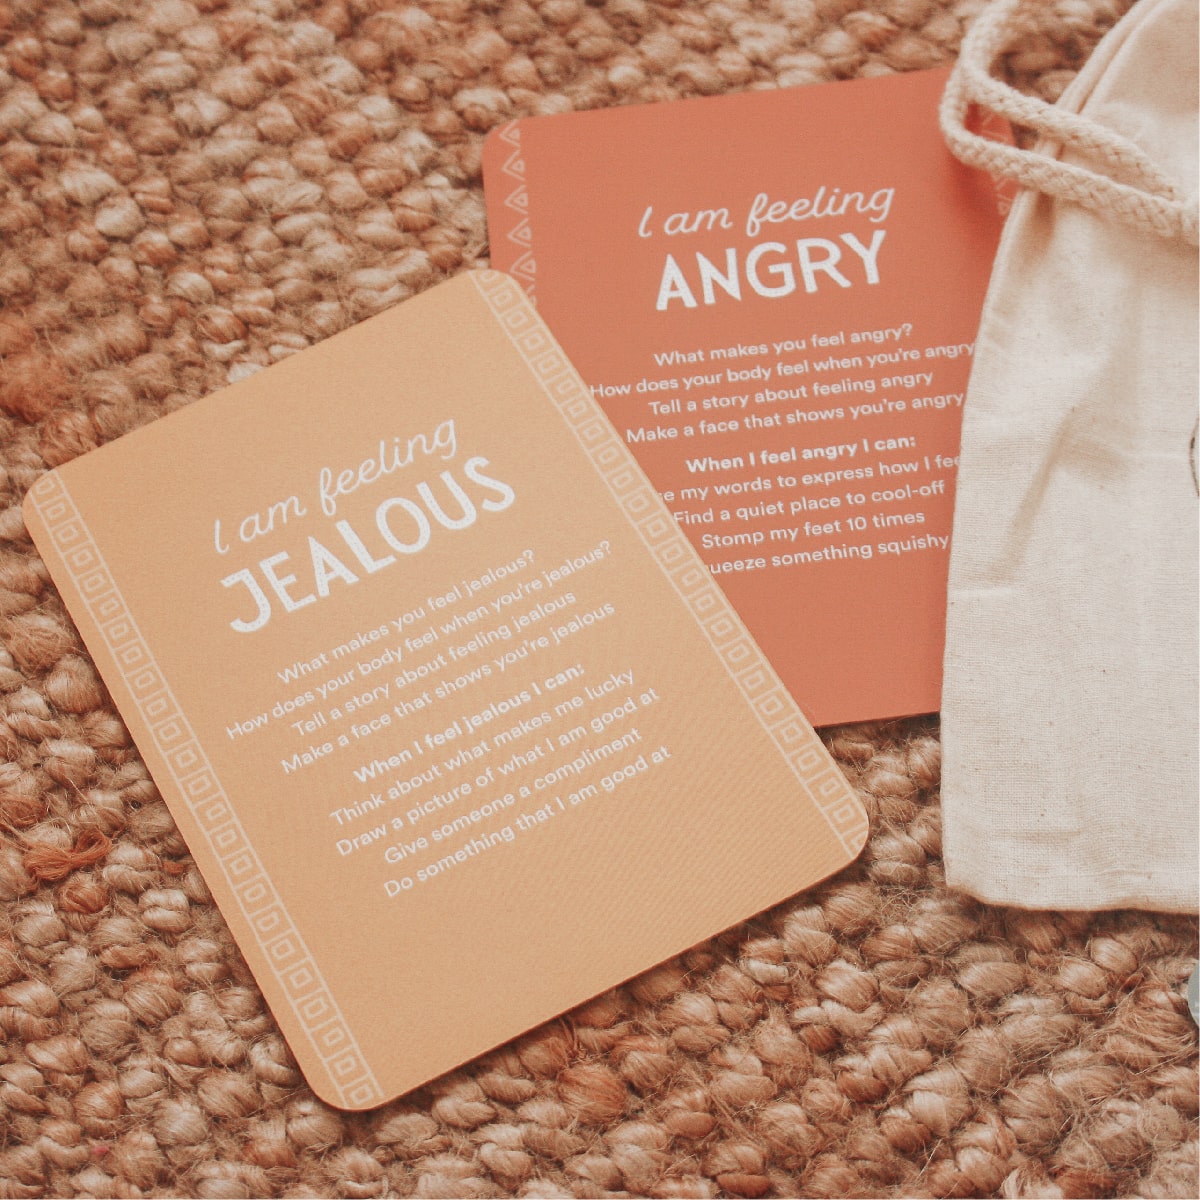 emotions flashcards showing coping strategies for toddlers and preschool kids